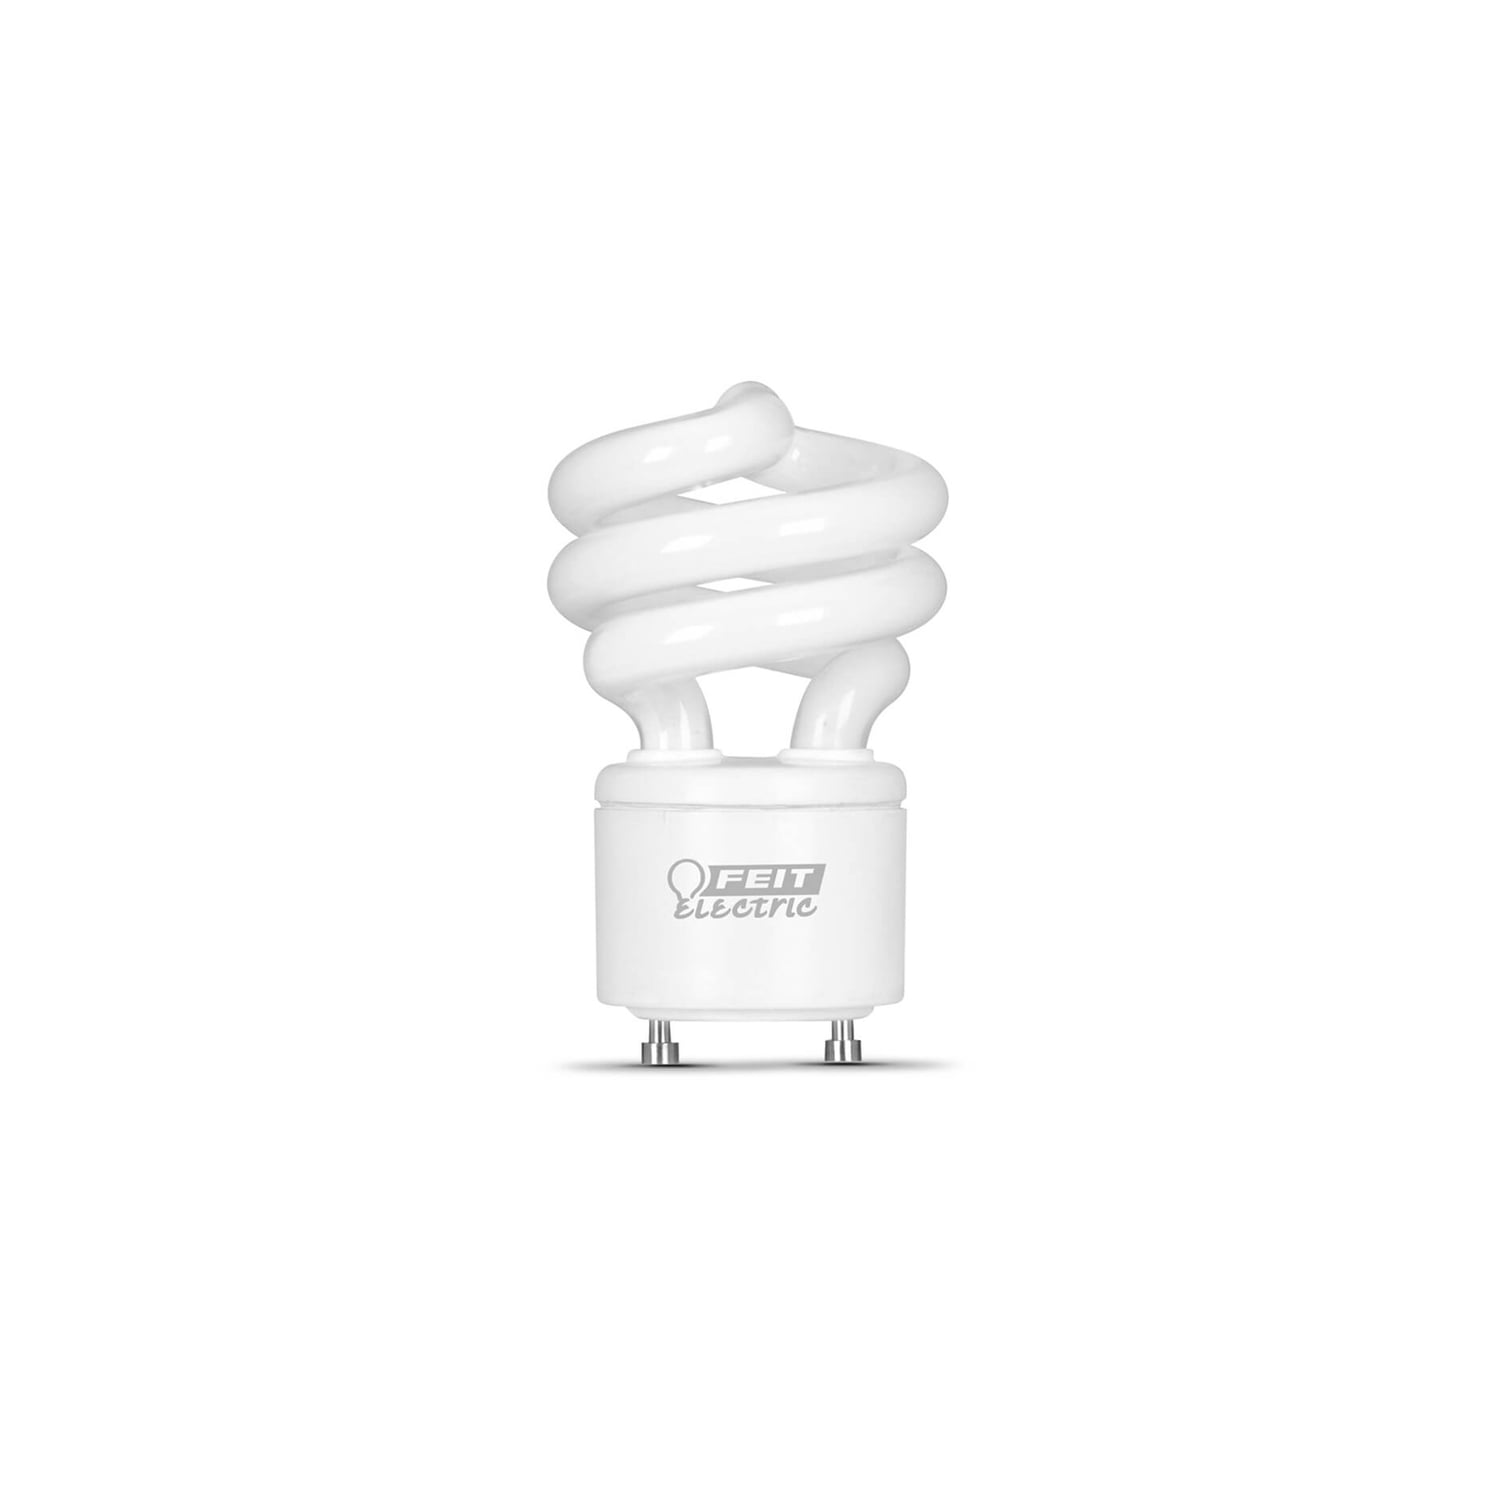 Replacement for Feit Electric Esl13t/gu24 Light Bulb by Technical Precision 